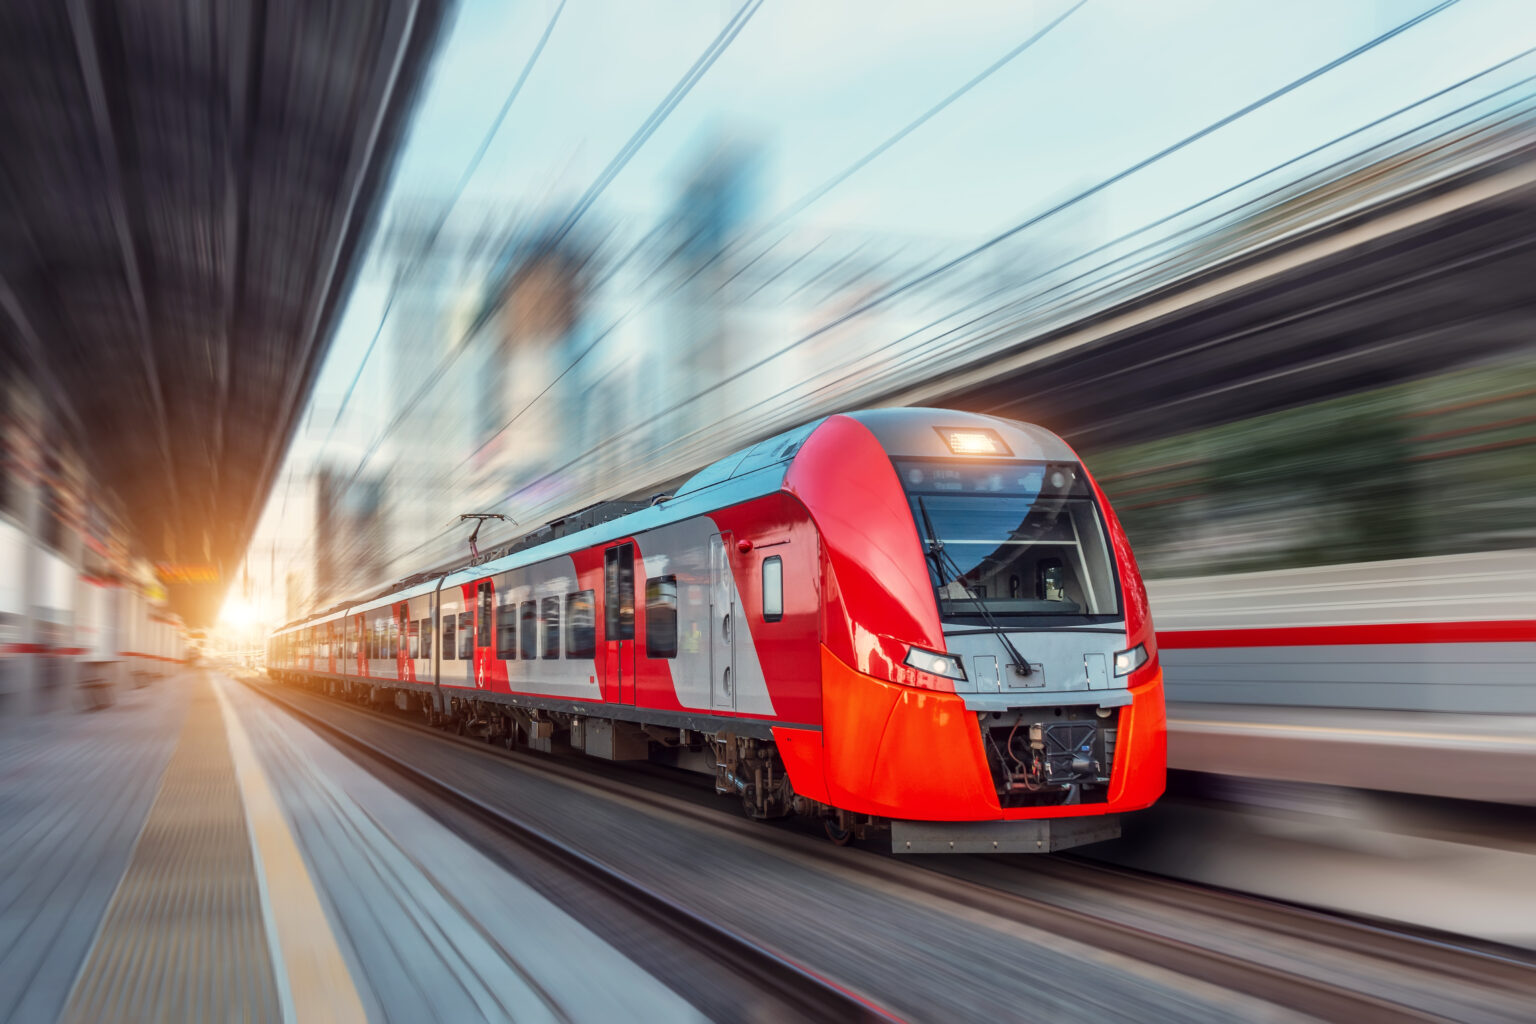 Motion-blurred picture of a red high-speed passenger train.